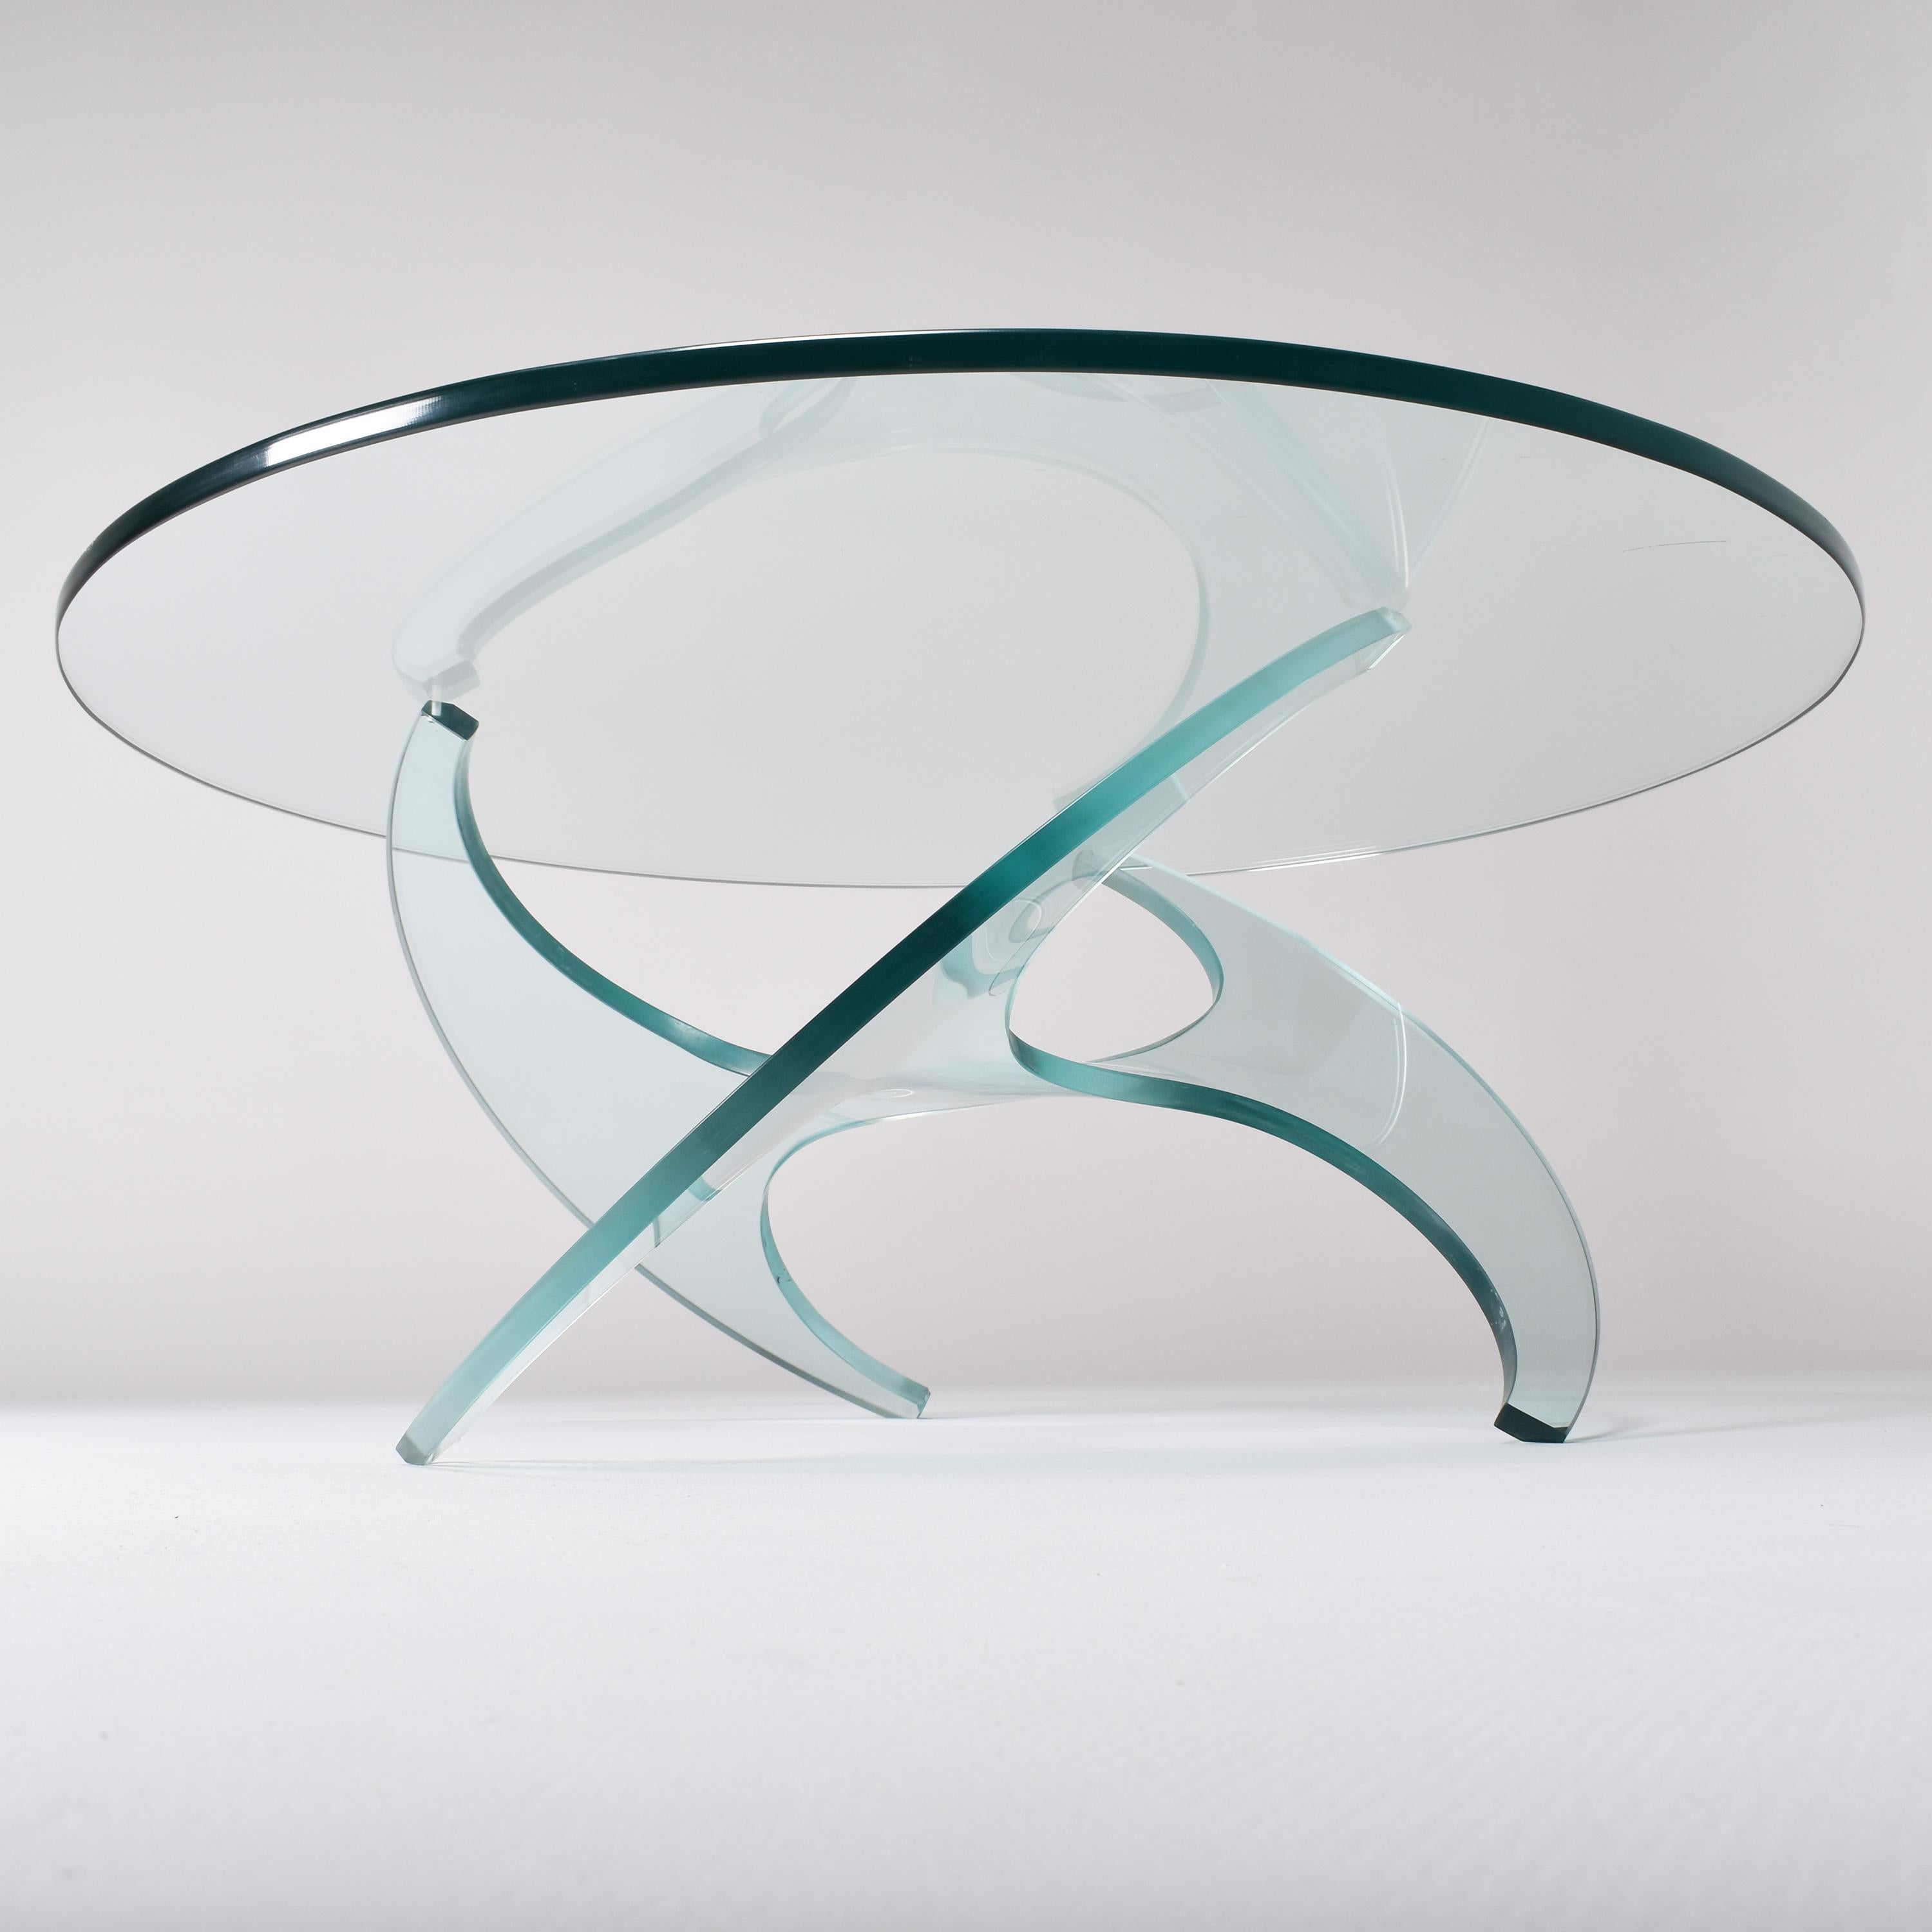 This round coffee table is the rare glass version of the 